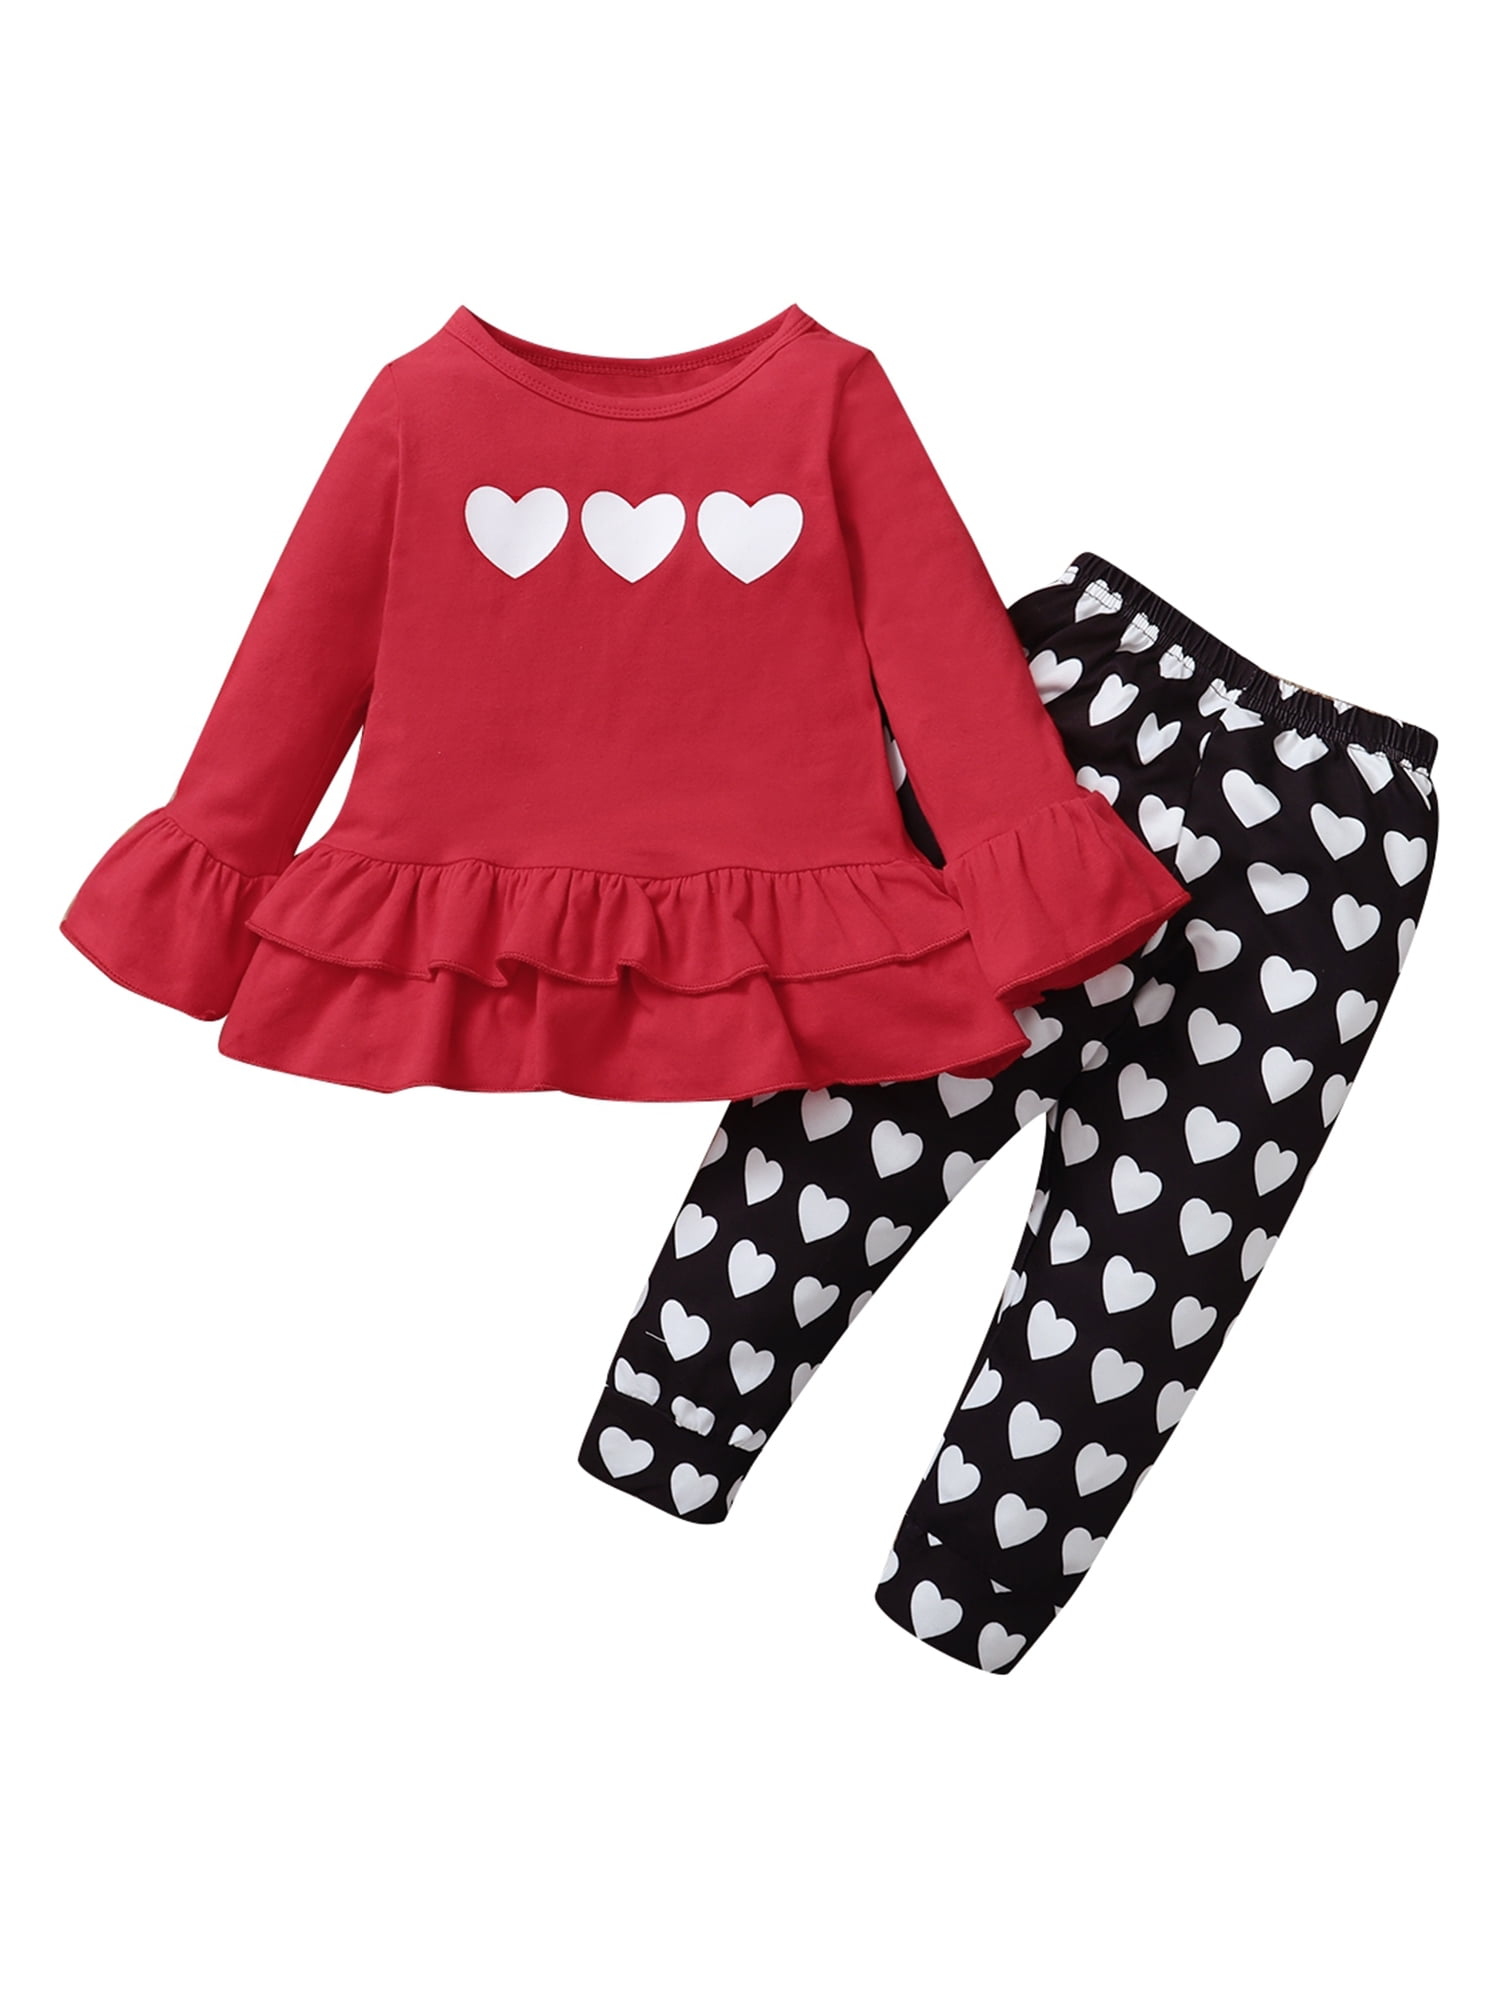 GuliriFei 2Pcs Toddler Baby Girls Valentine's Day Clothes Set, Heart ...